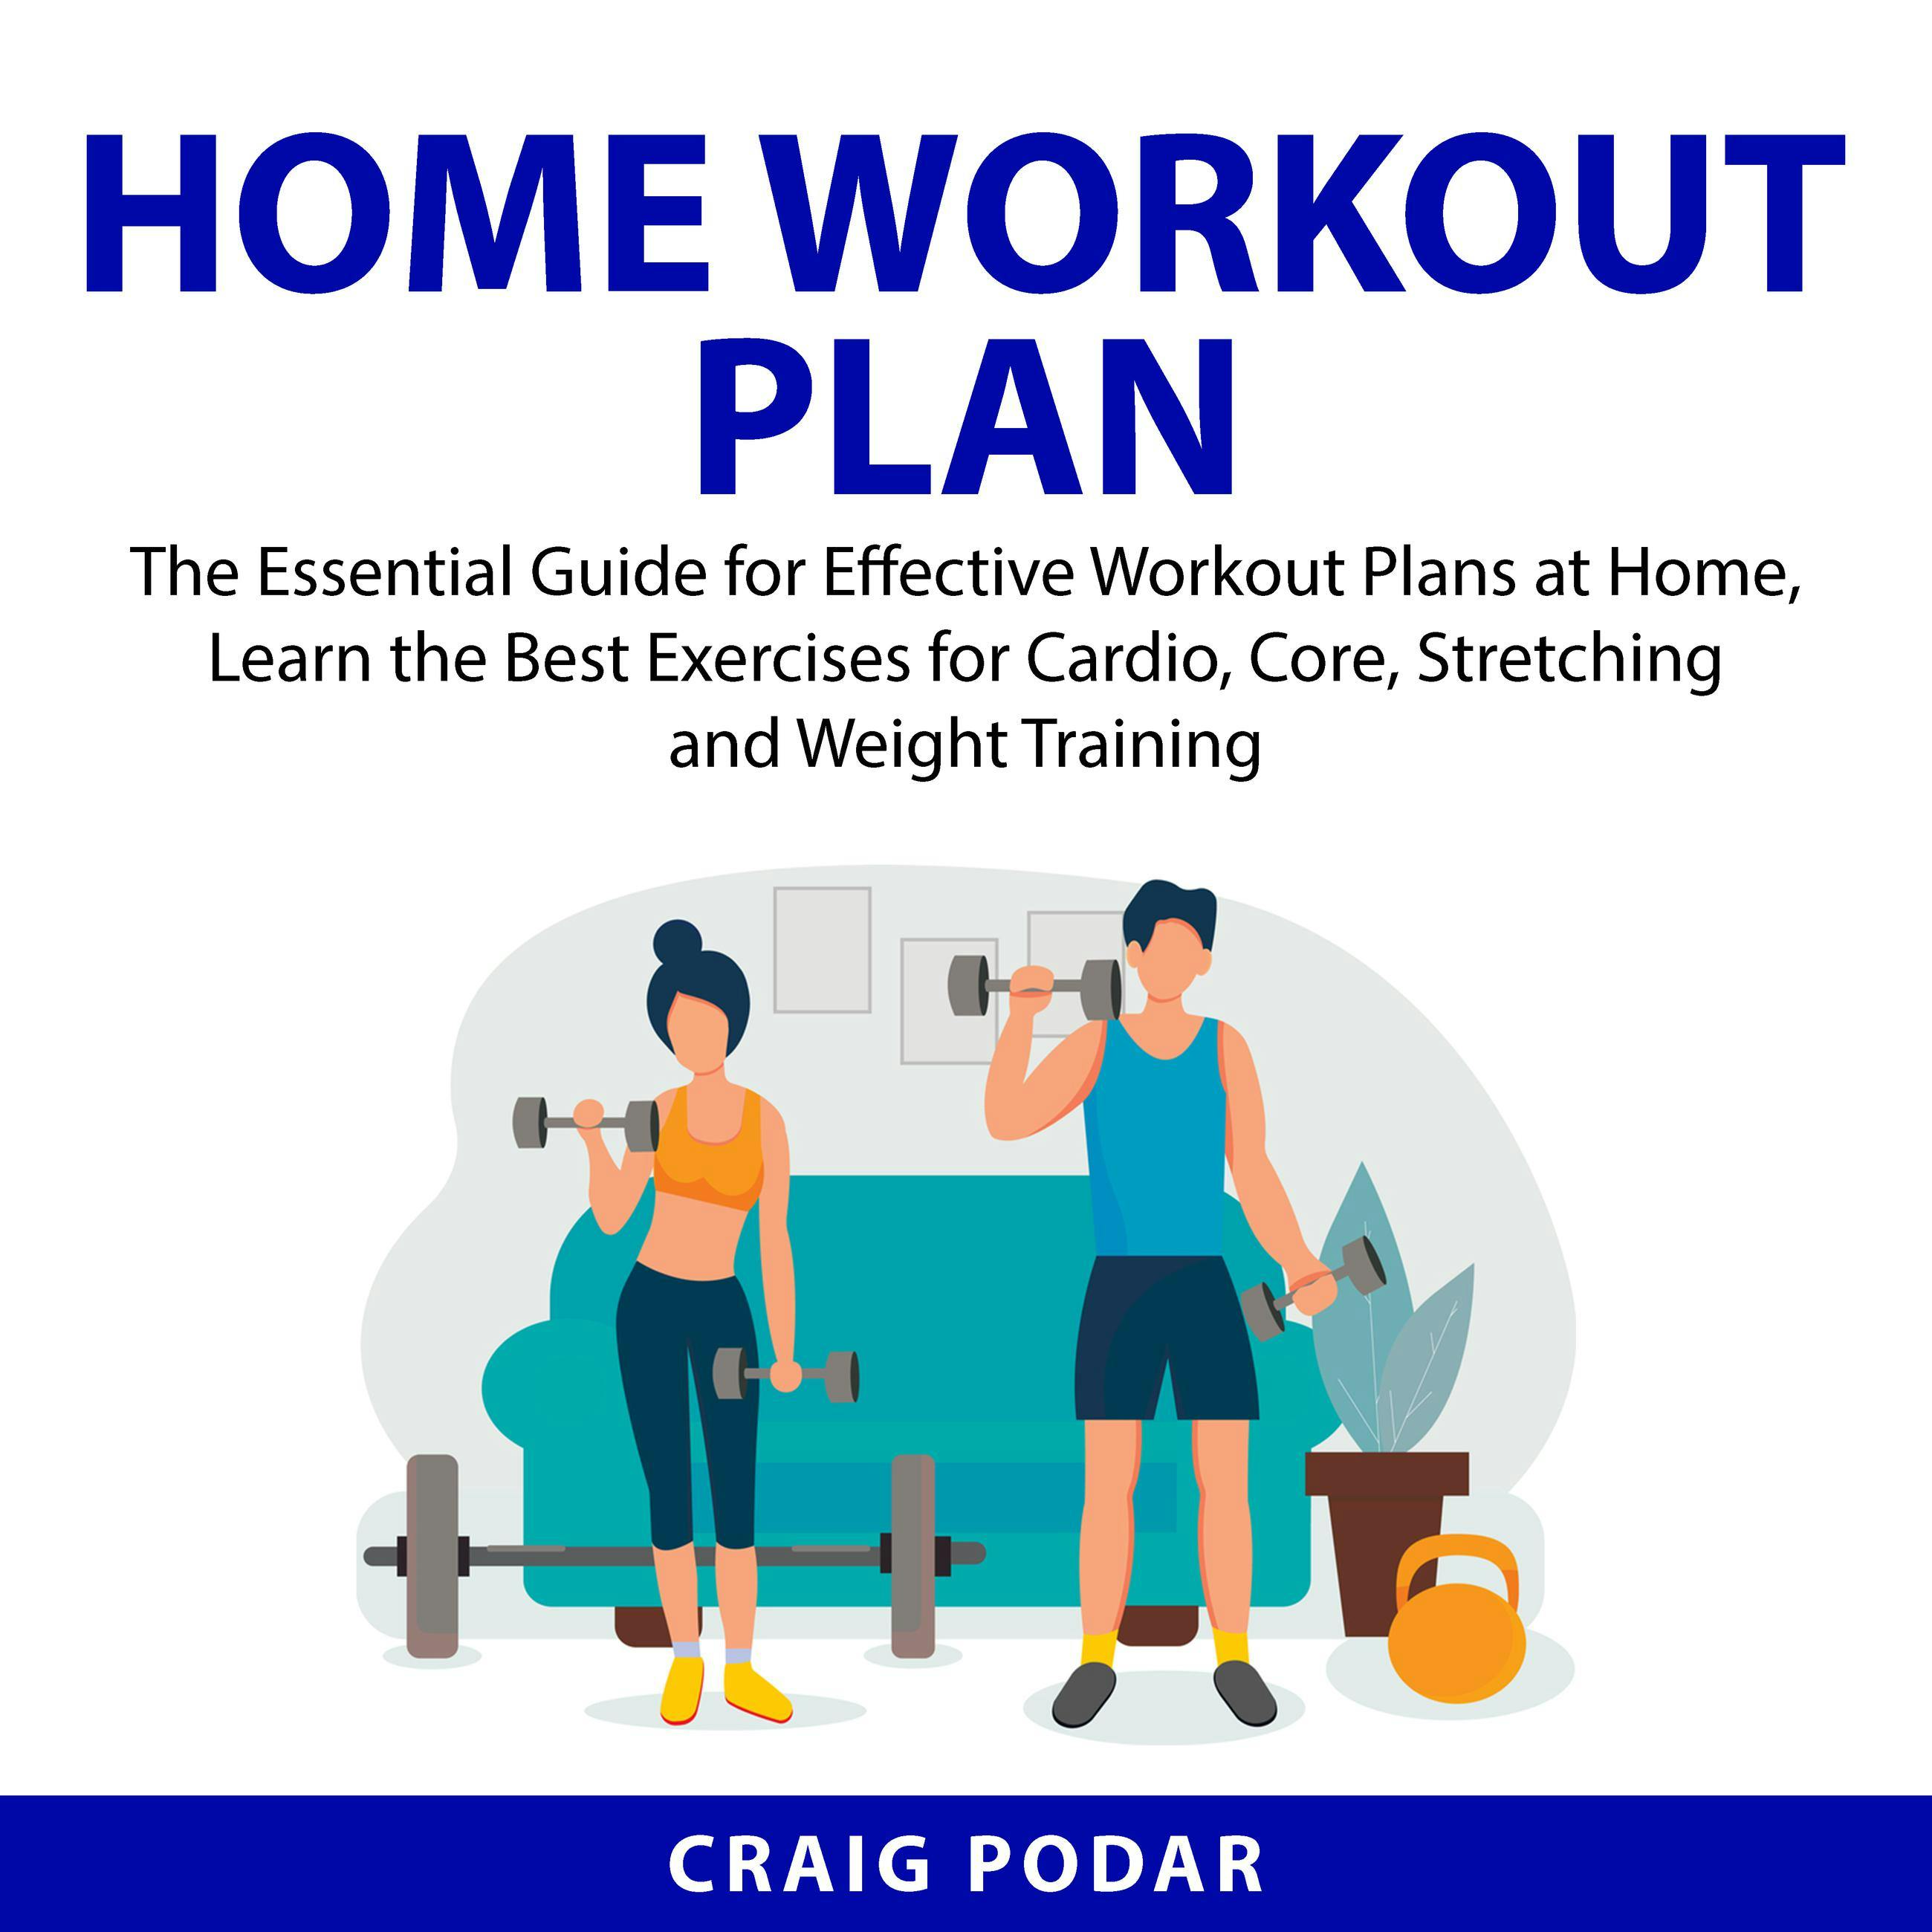 Home Workout Plan: The Essential Guide for Effective Workout Plans at Home, Learn the Best Exercises for Cardio, Core, Stretching and Weight Training - Craig Podar